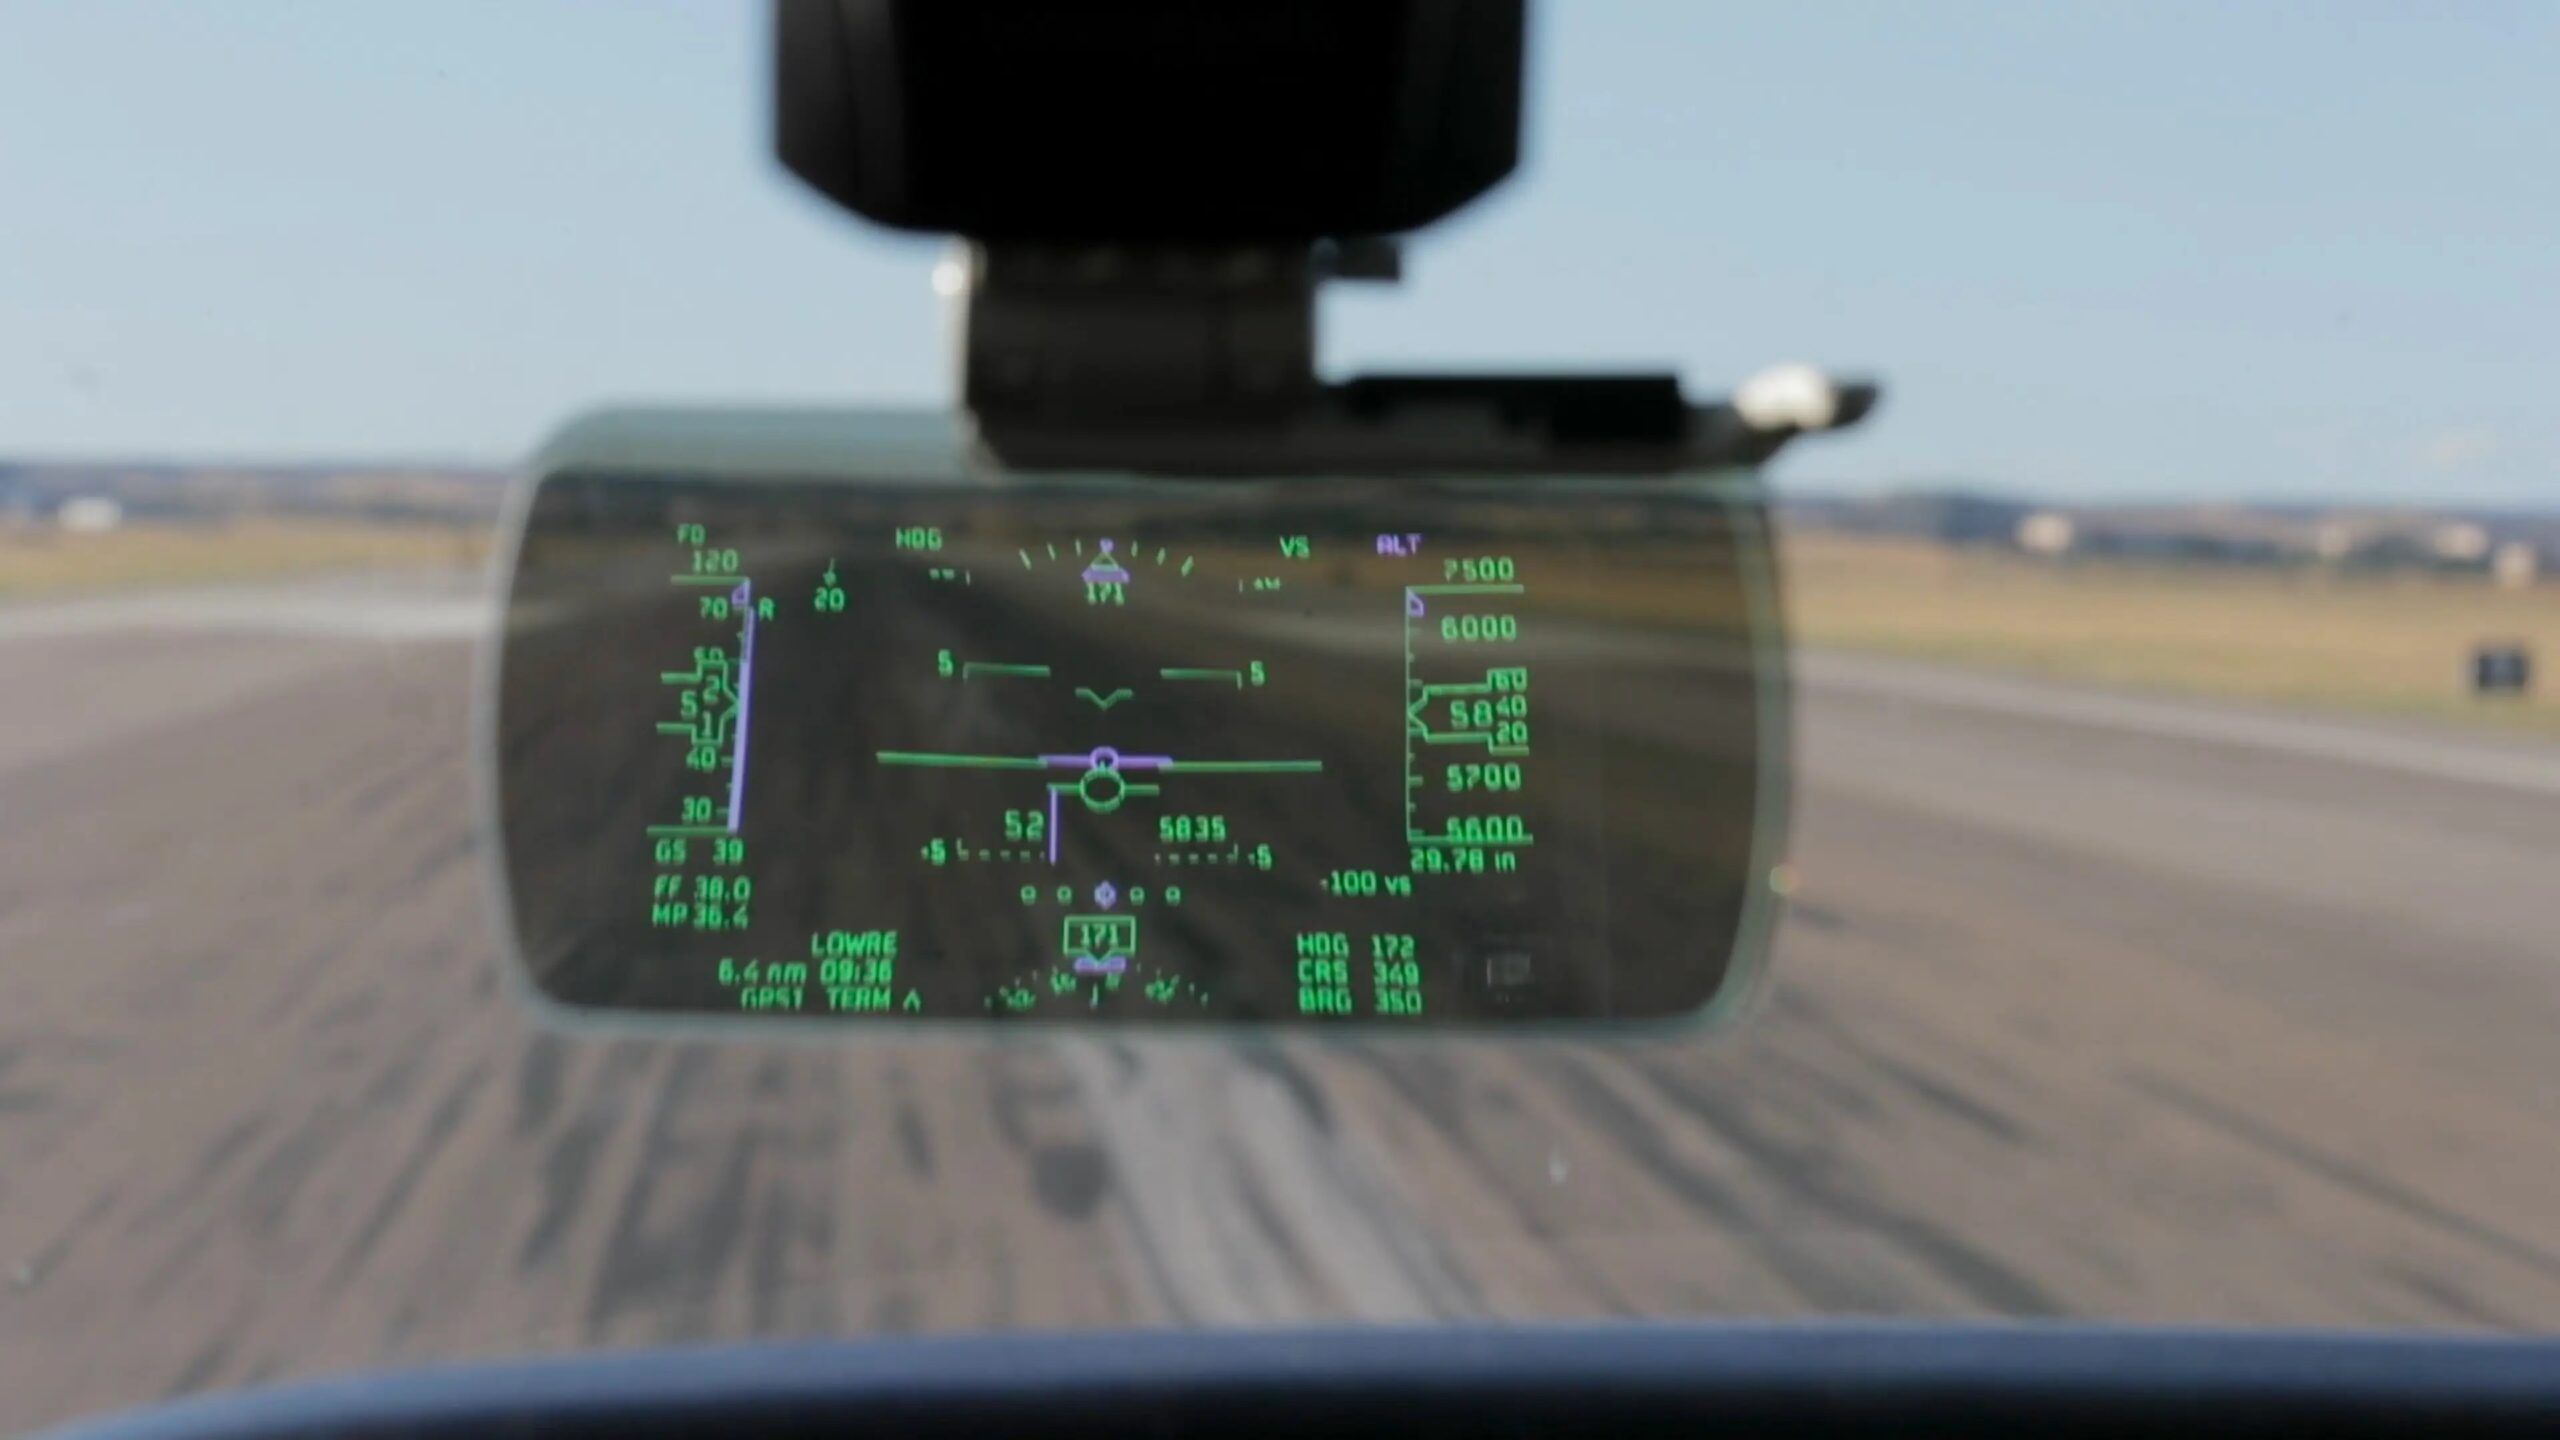 Garmin® Introduces Its First Portable Head-up Display (HUD